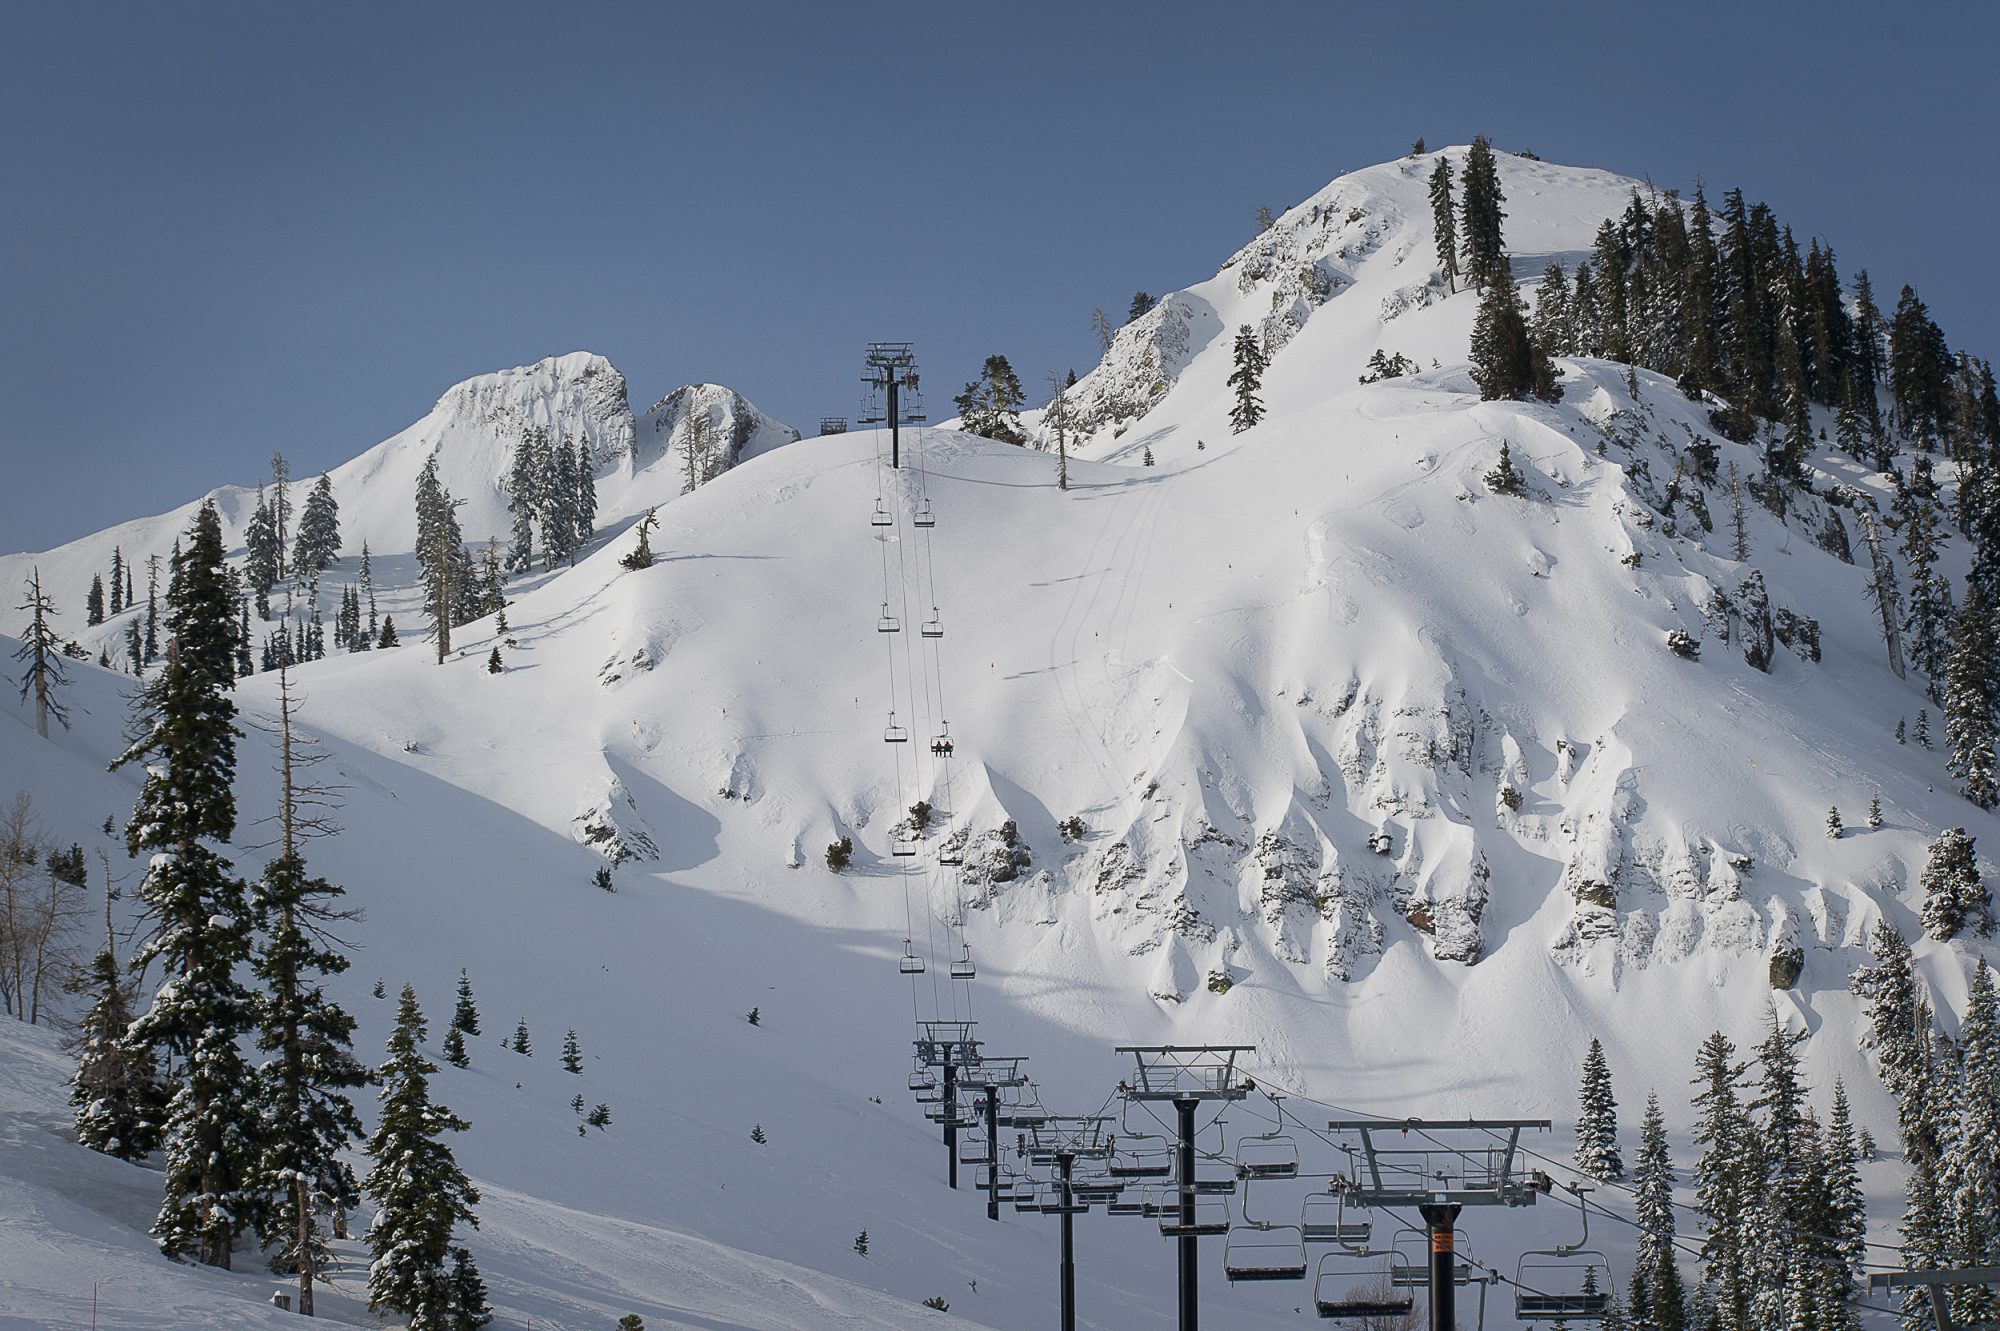 Early Morning KT-22 Bluebird powder day at Squaw Valley USA. Alterra Mountain Company Announces $181 Million in Capital Improvements for the 2019/2020 Winter Season.